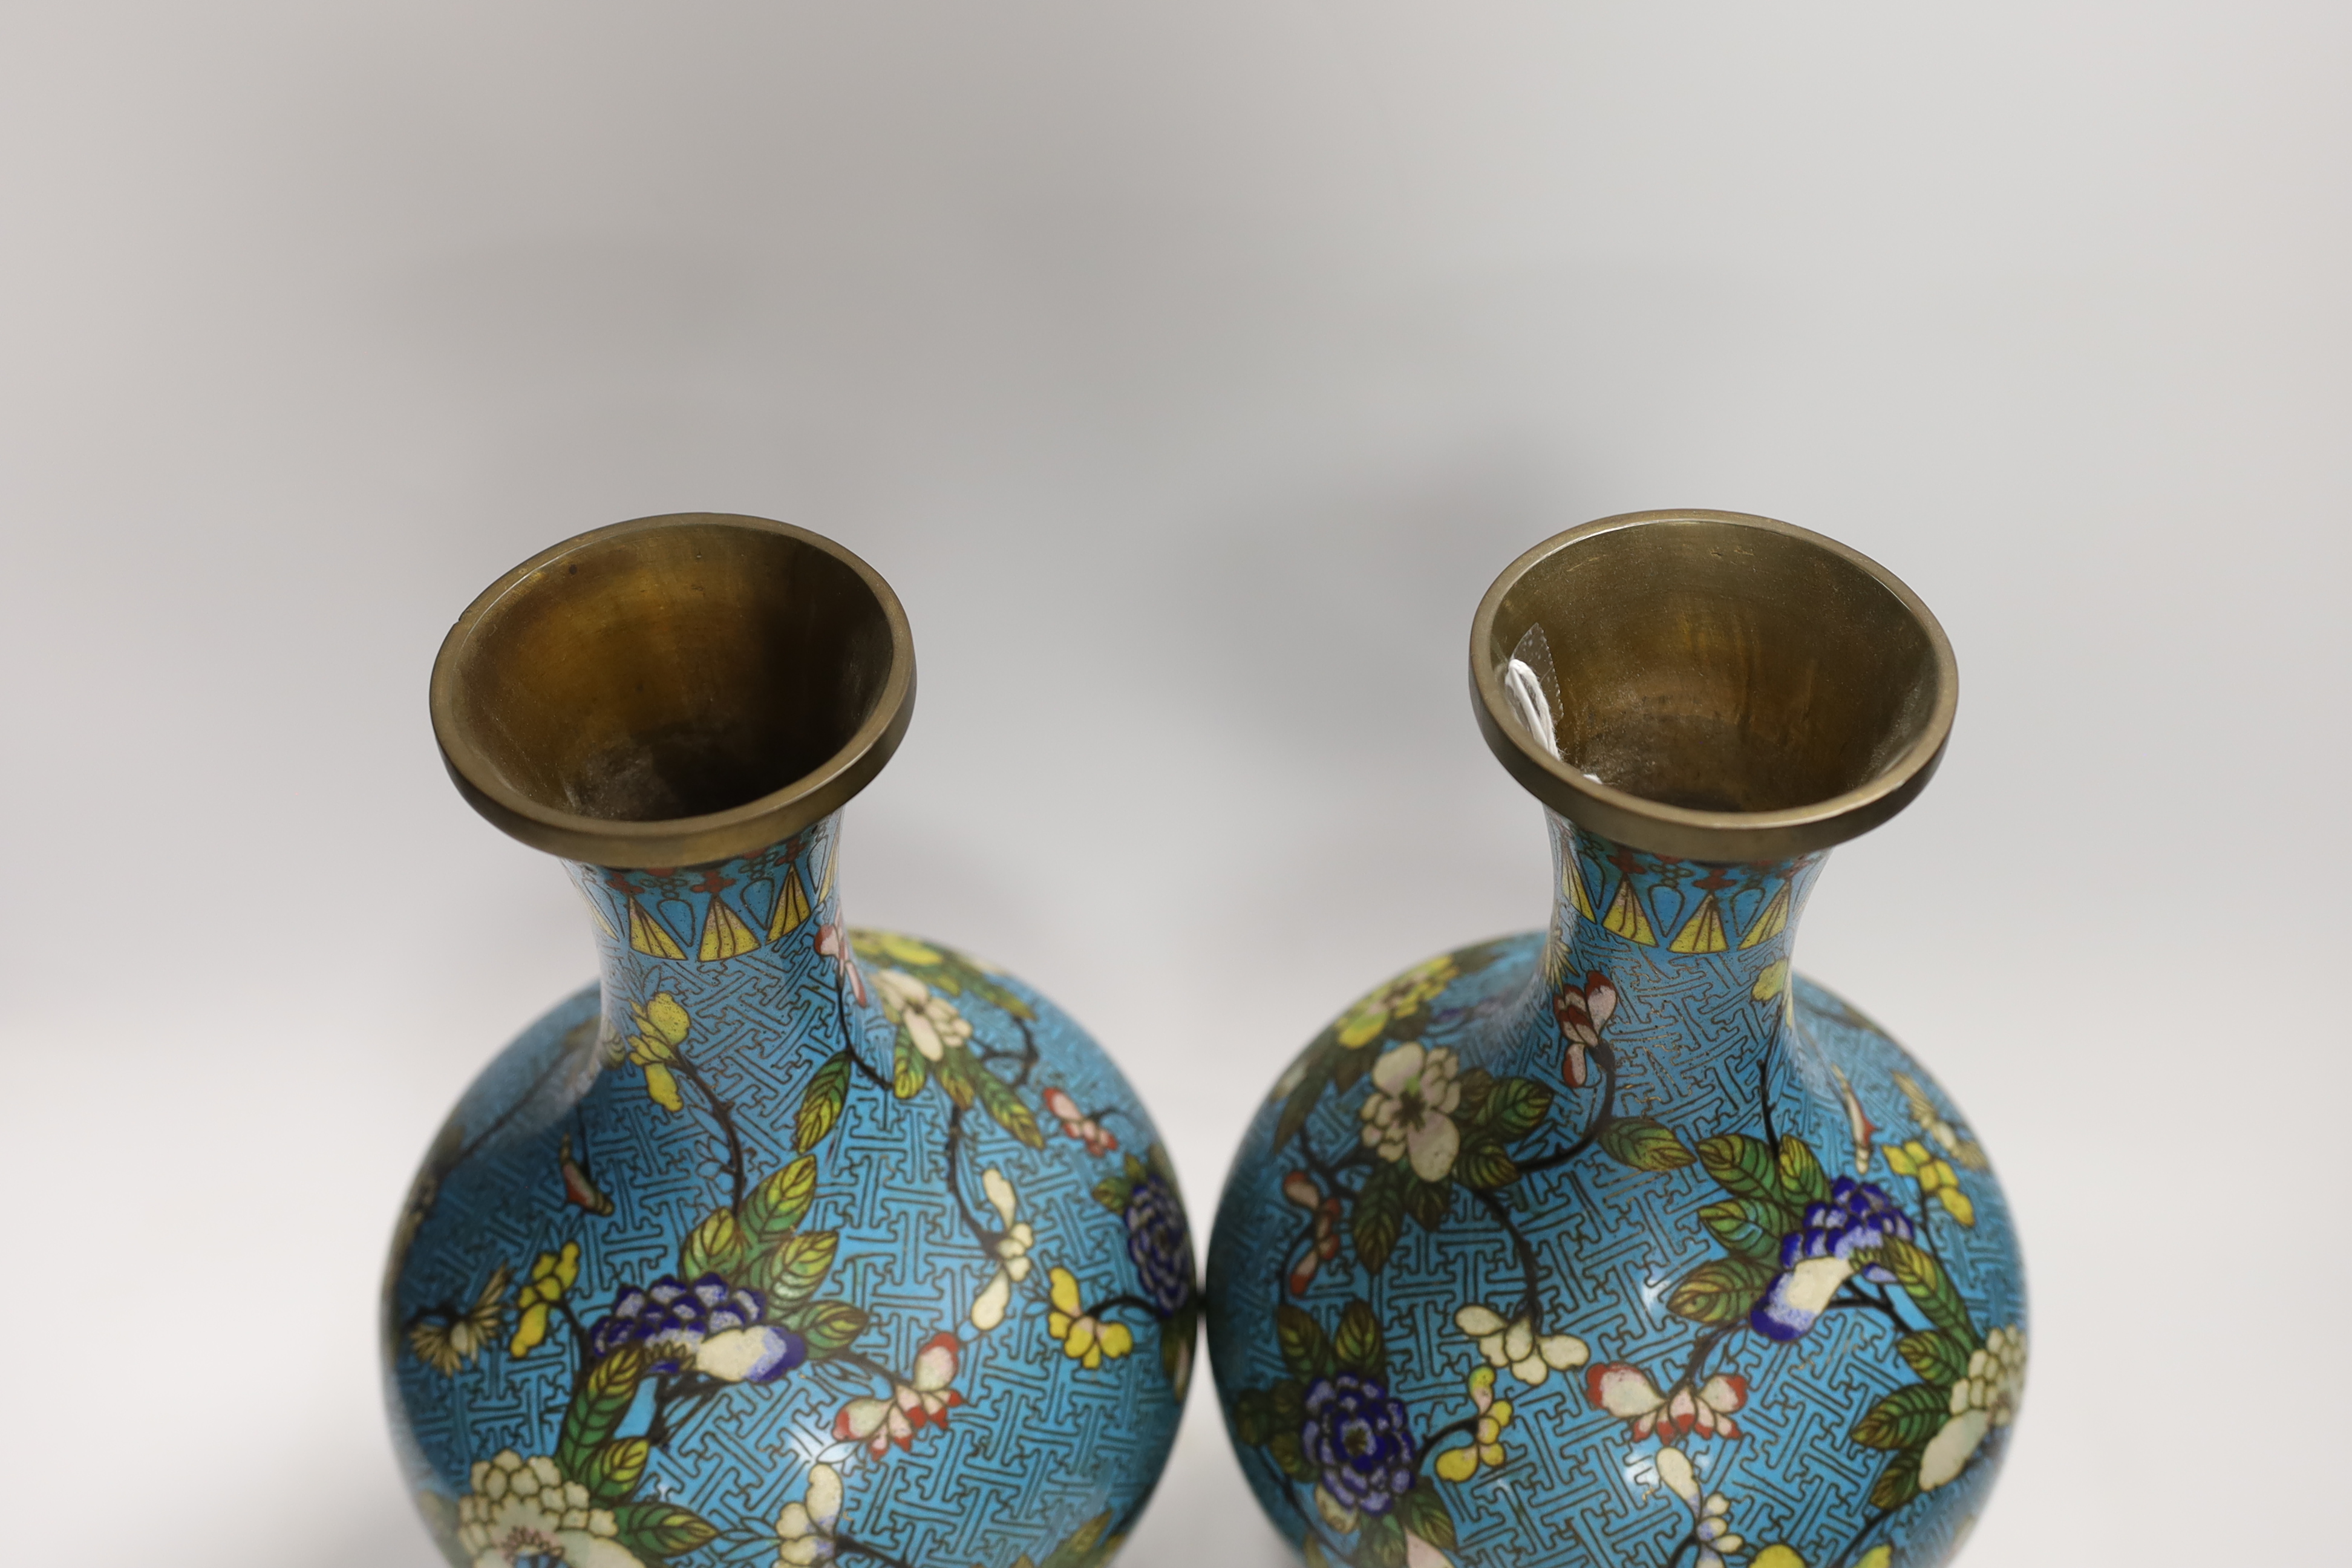 A pair of Chinese cloisonné enamel vases, late Qing dynasty, 31cm, (a.f.), on hardwood stands